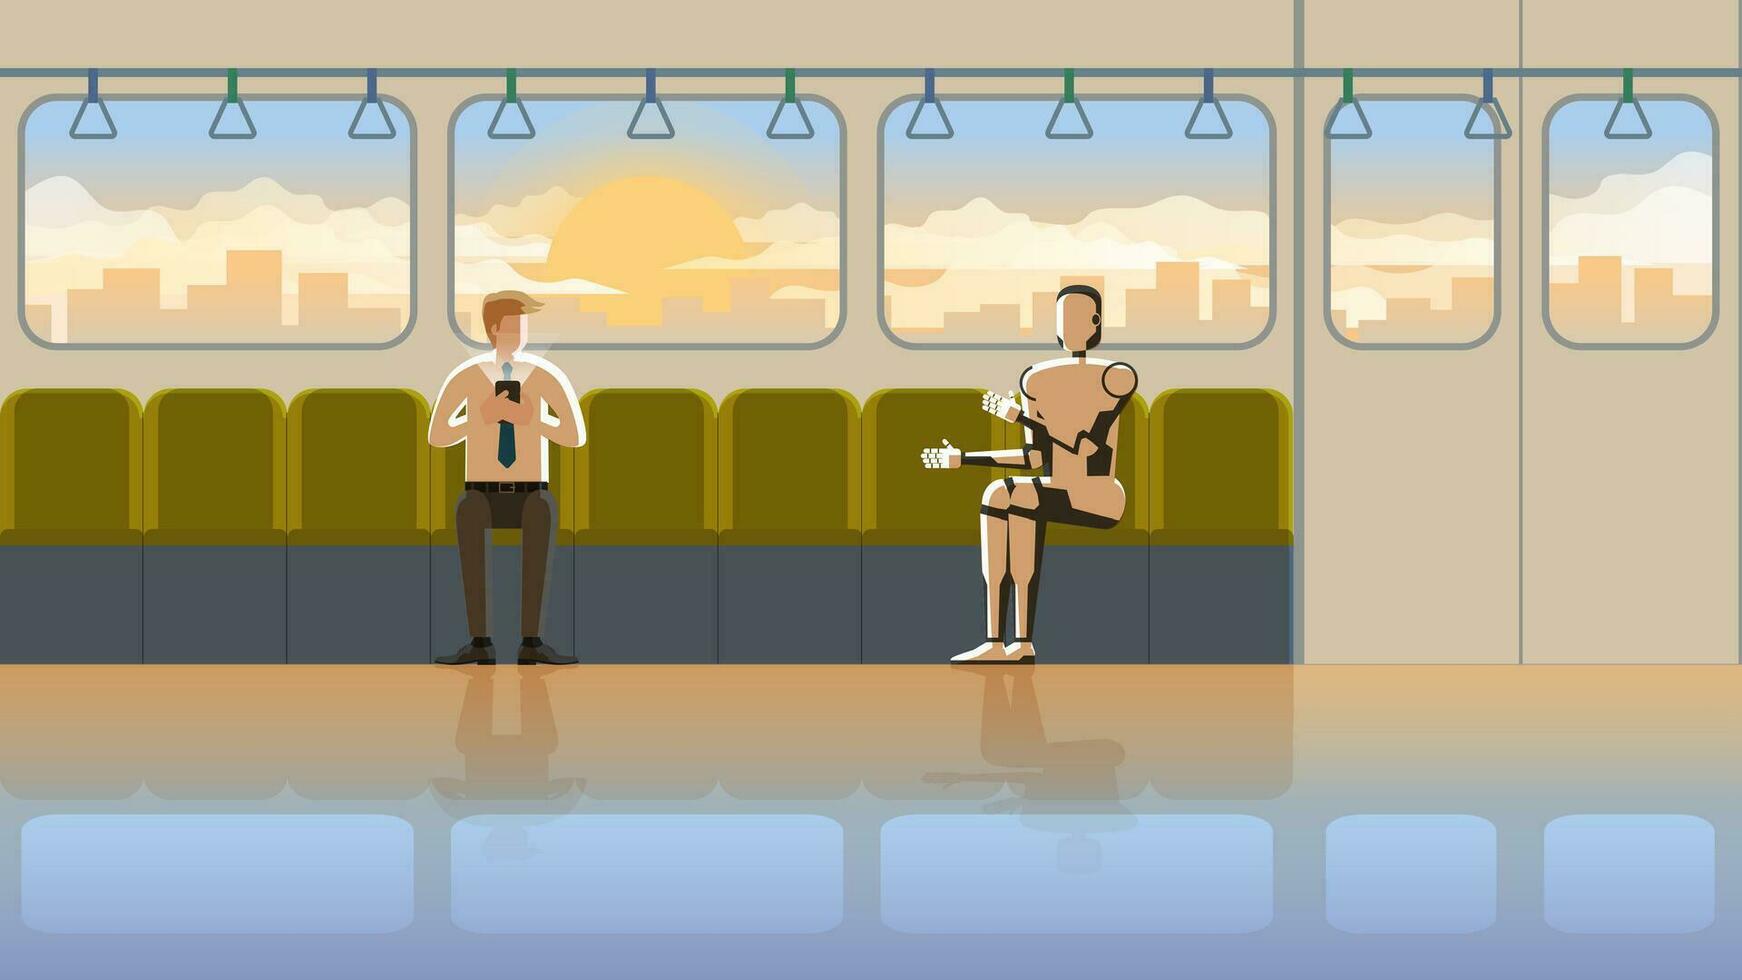 A man sits and listens to the robot speak on a train public transportation vector